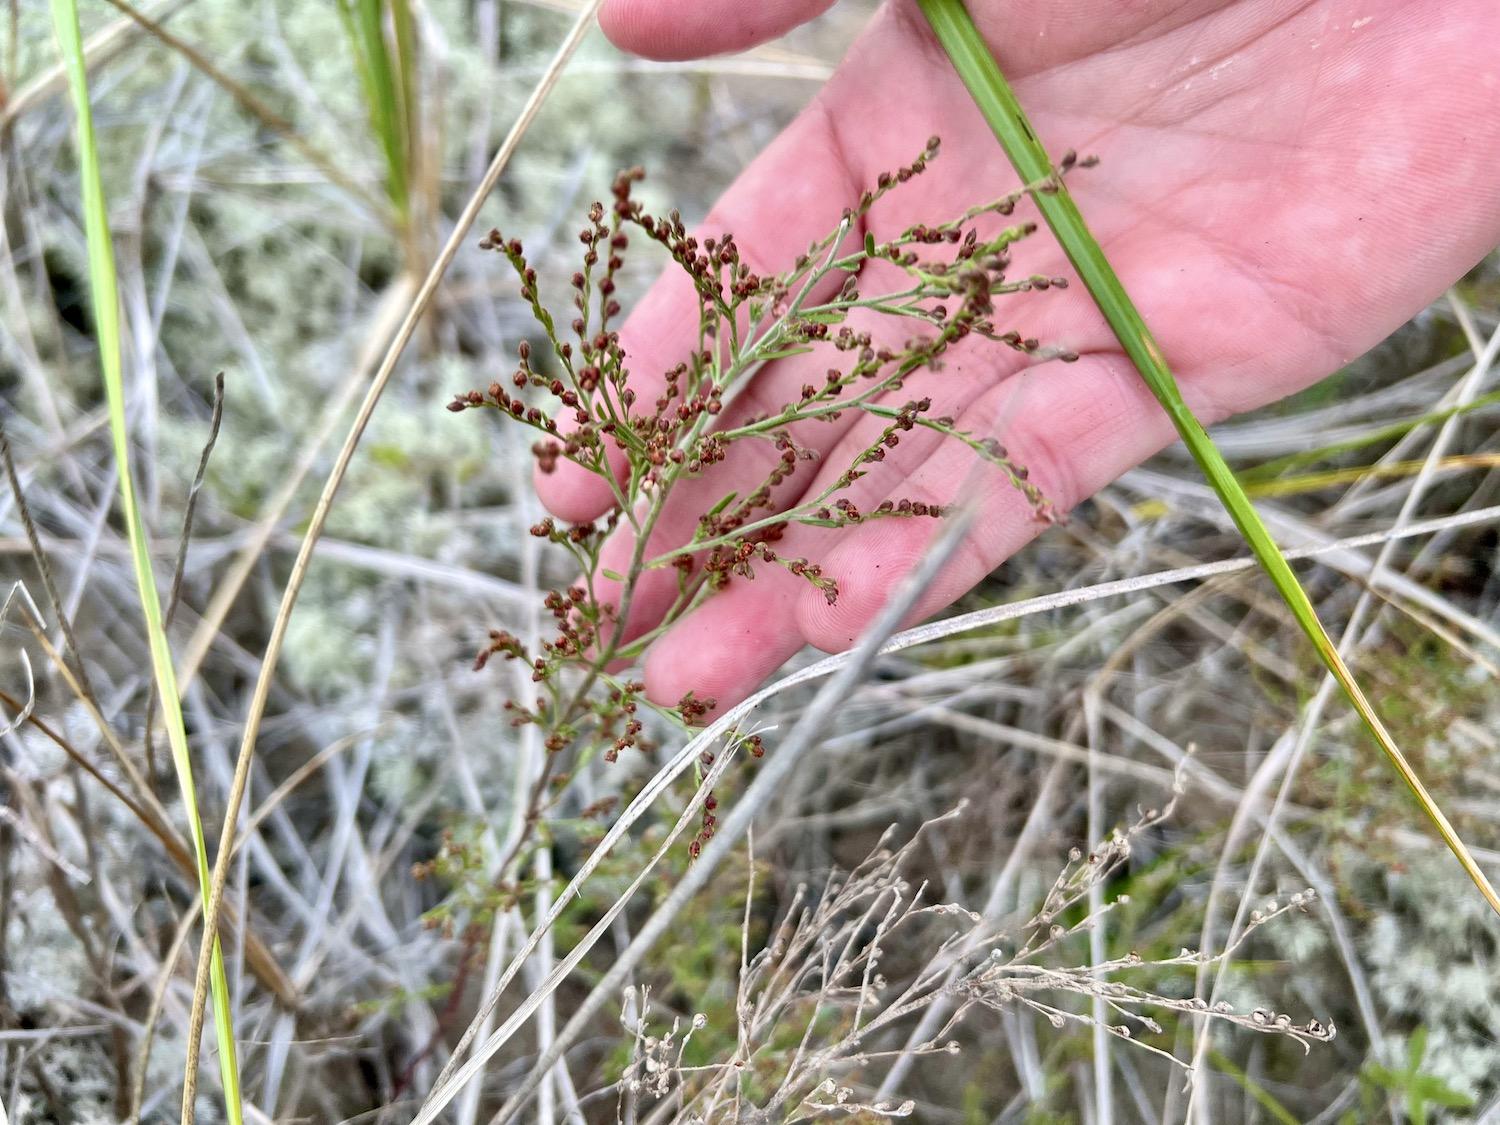 Beach pinweed is subtle and grows near the ground on dunes so is easily missed.